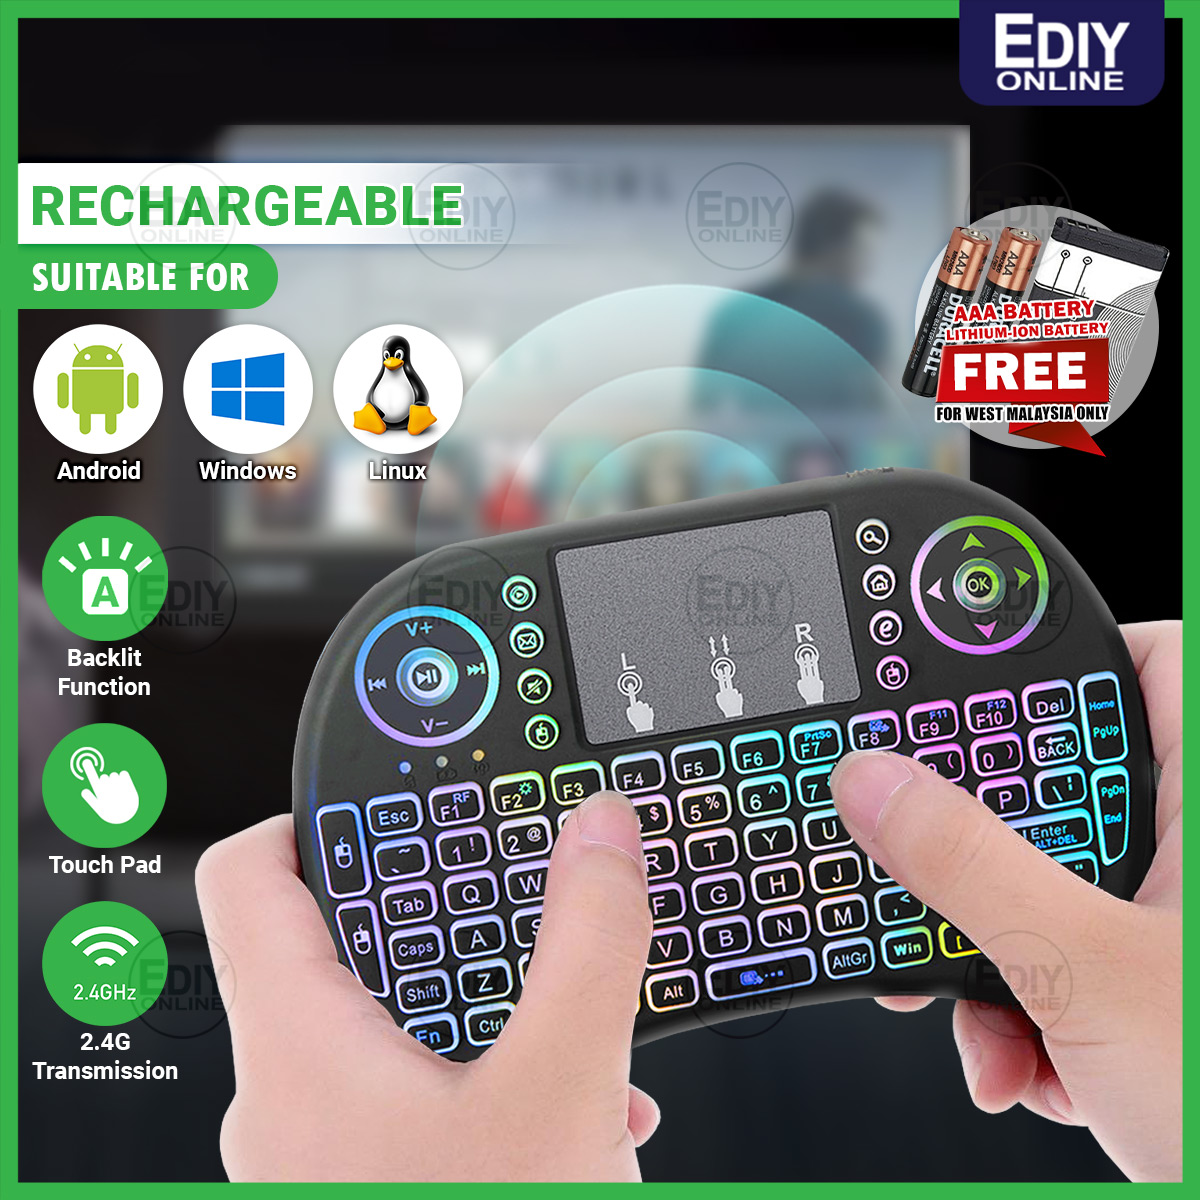 I8 AIR MOUSE FLY MOUSE USB WIRELESS KEYBOARD TOUCHPAD KEYPAD REMOTE Control FOR ANDROID SMART TV PC LAPTOP PS CCTV KARAOKE svicloud digital DECODER PS3 PS4 Xbox Smart TV Ediyonline Ediy